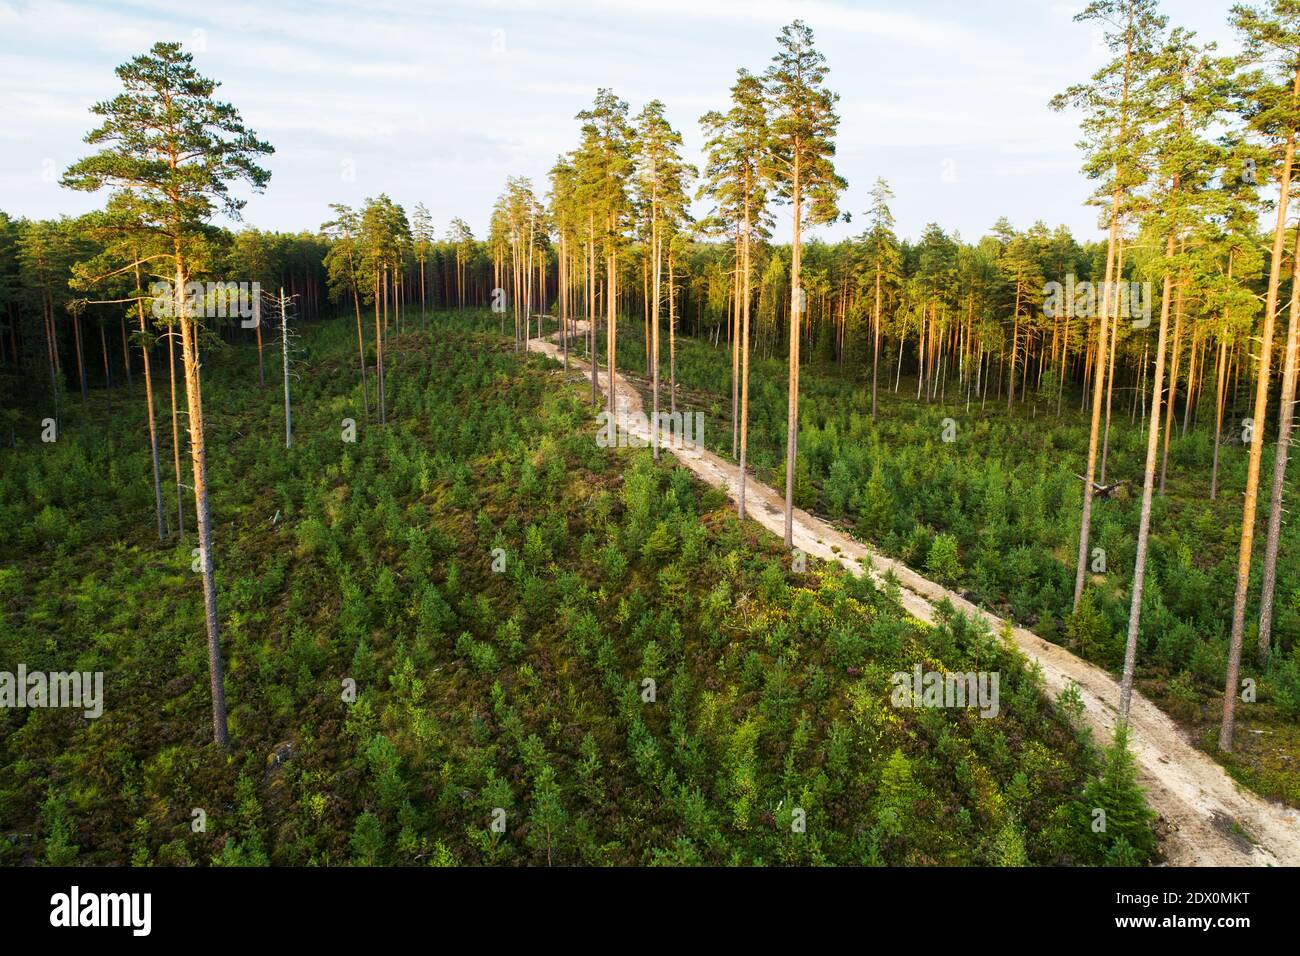 An aerial of former clear-cut area with new young pine trees and tall seed trees left after logging in Estonia, Nortern Europe. Stock Photo